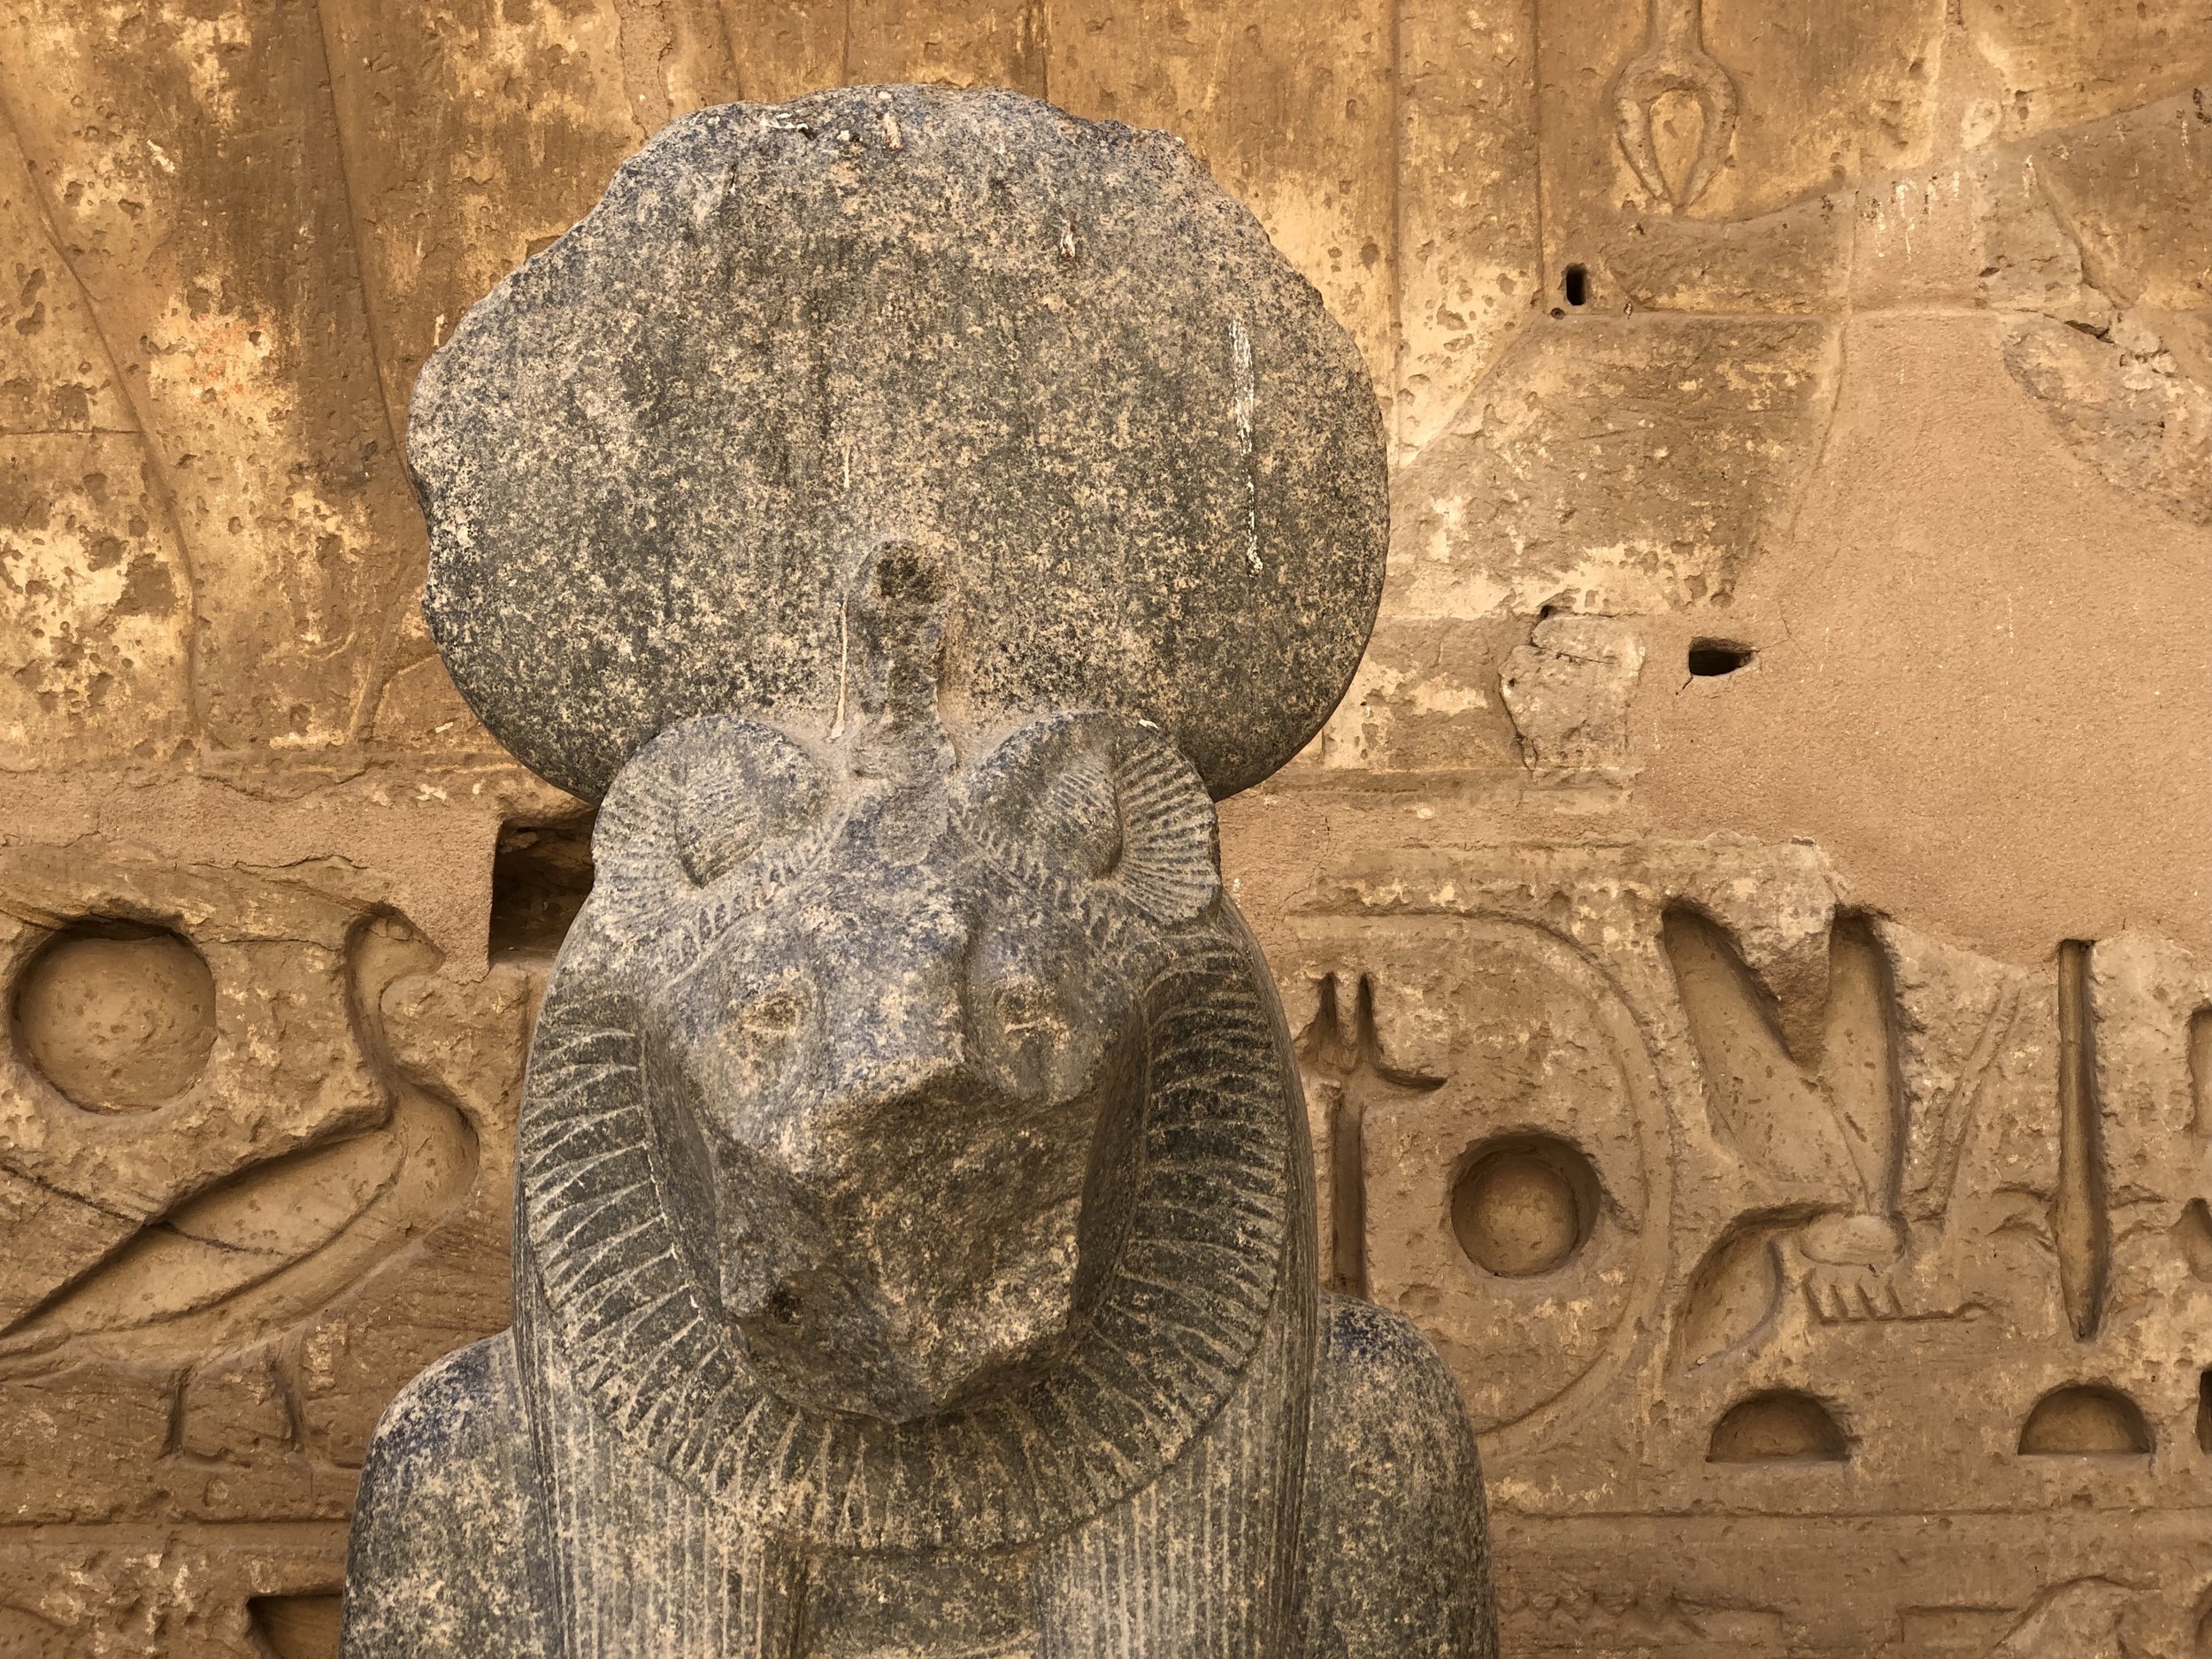 Aside from towering depictions of pharaohs, you don’t see many statues in temples